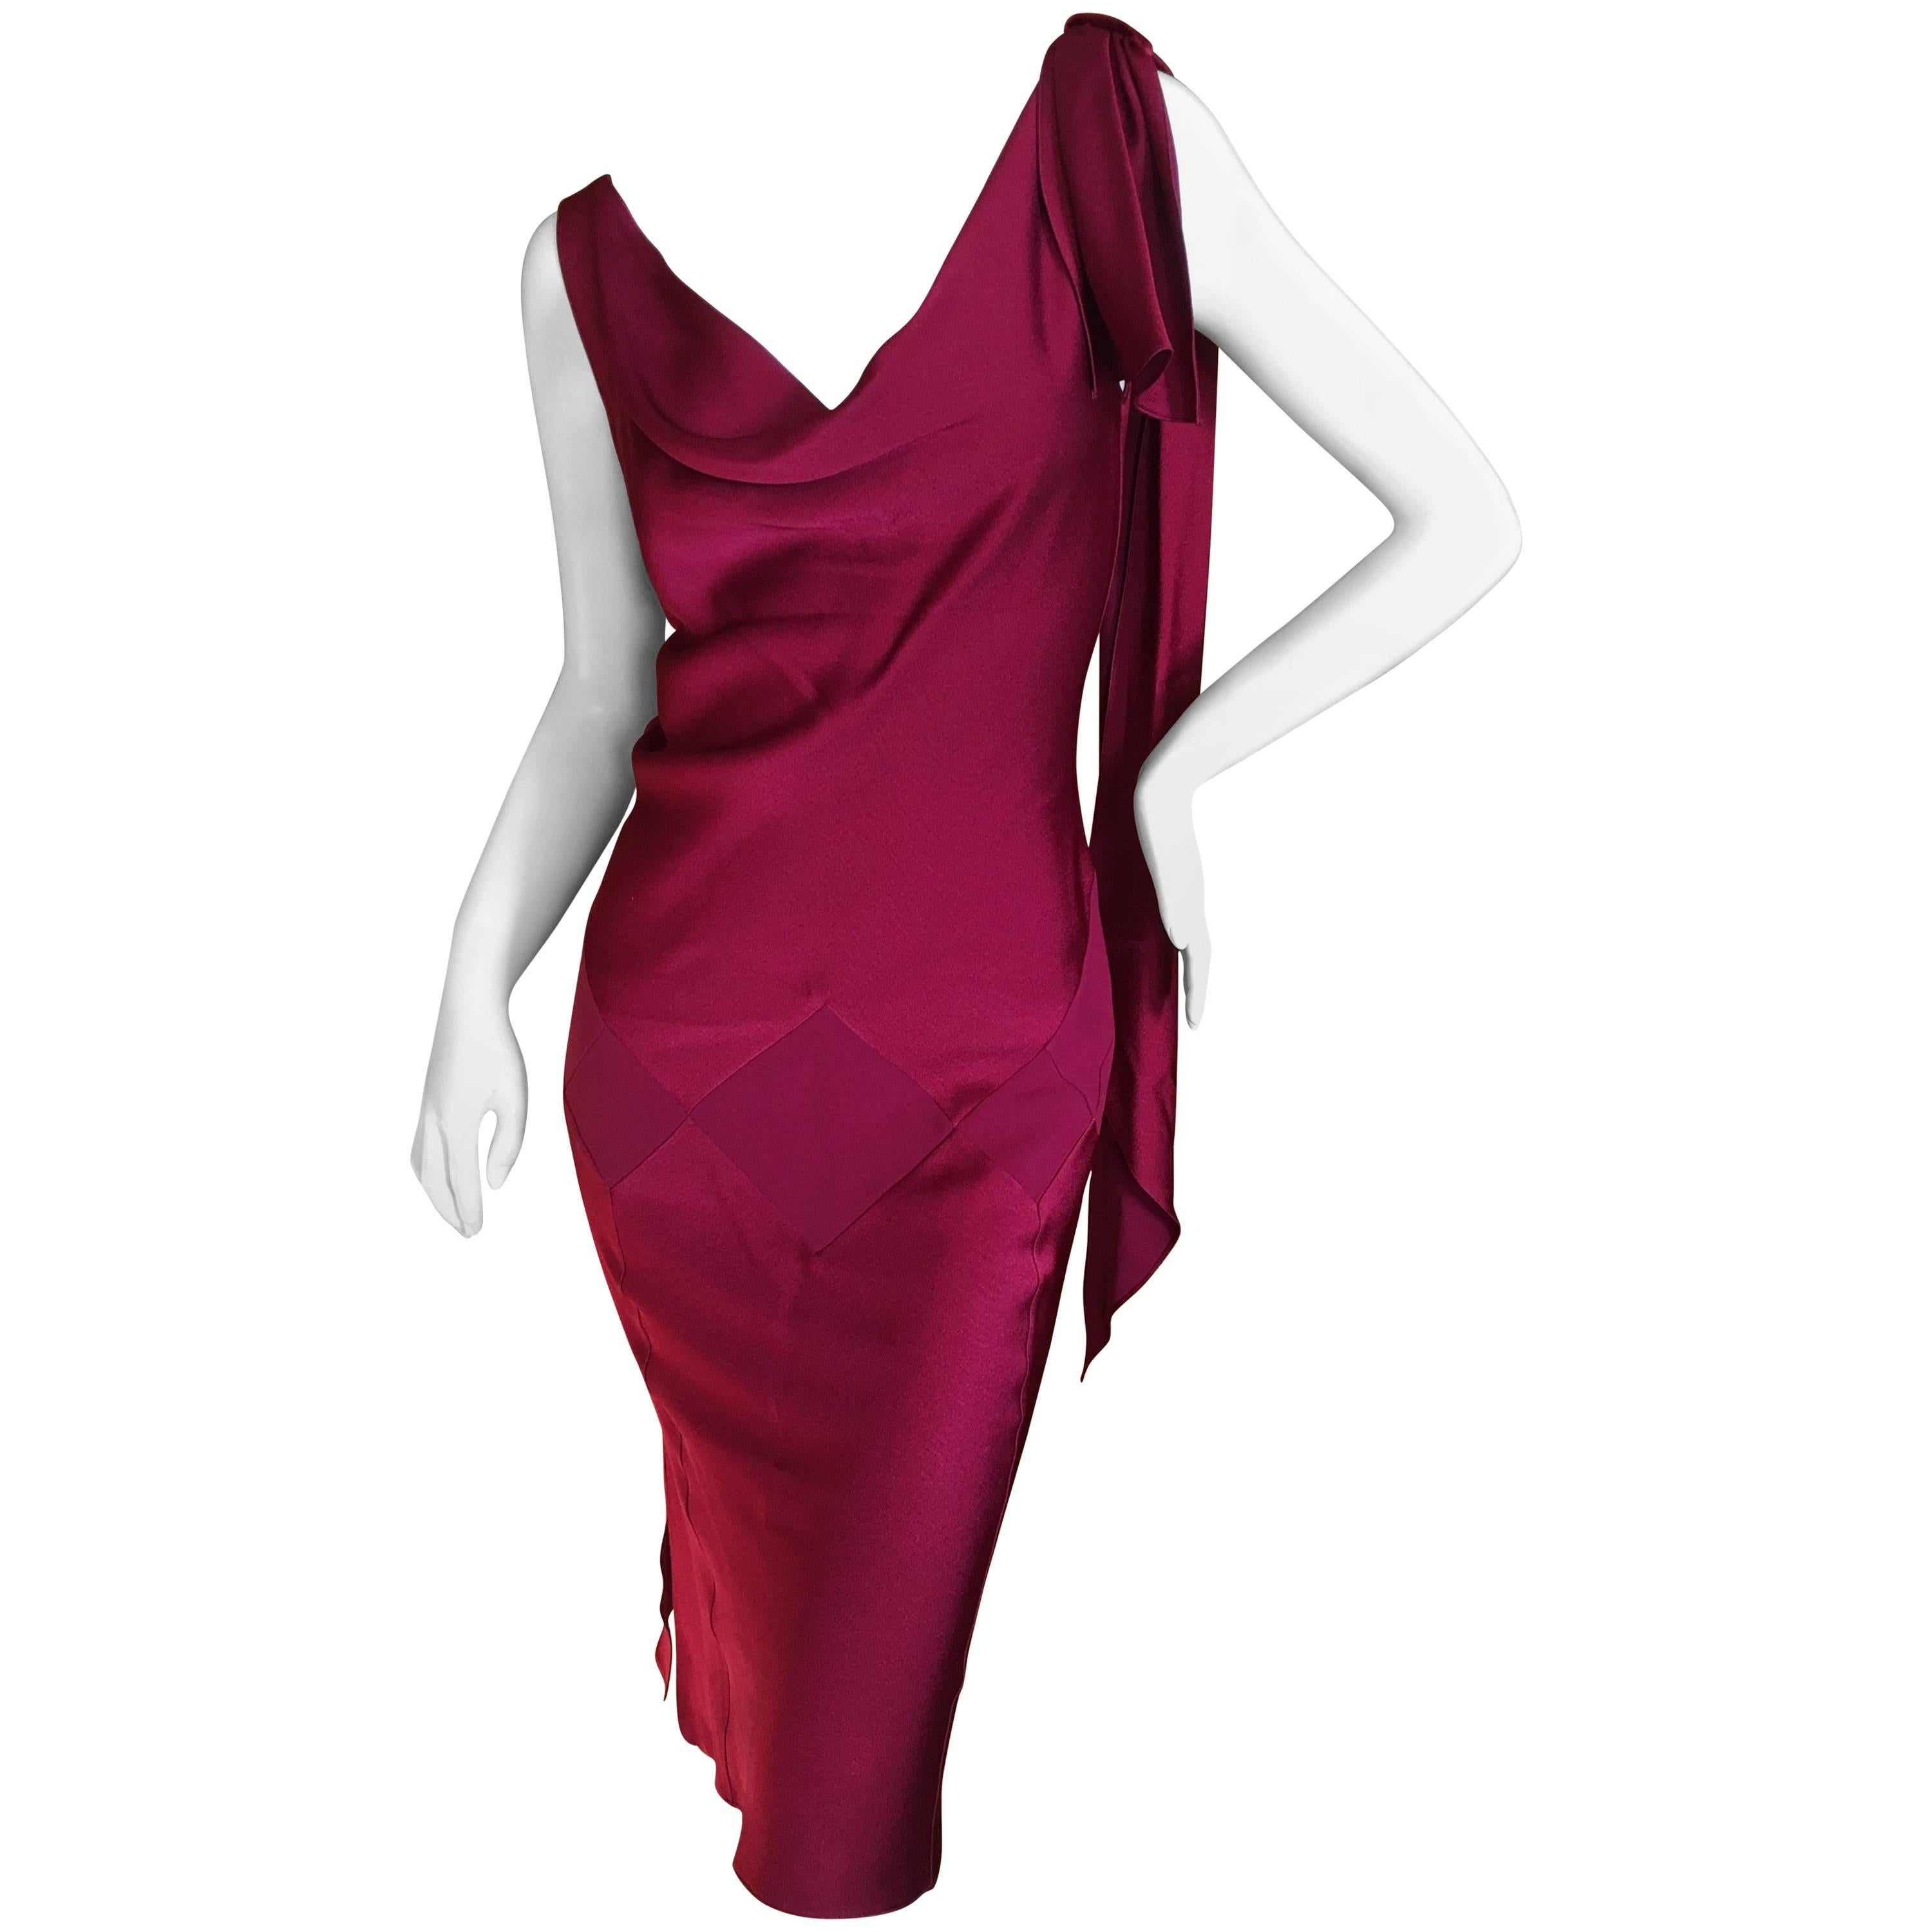 John Galliano Vintage Red Bias Cut Dress with Attached Scarf Late 90's  For Sale